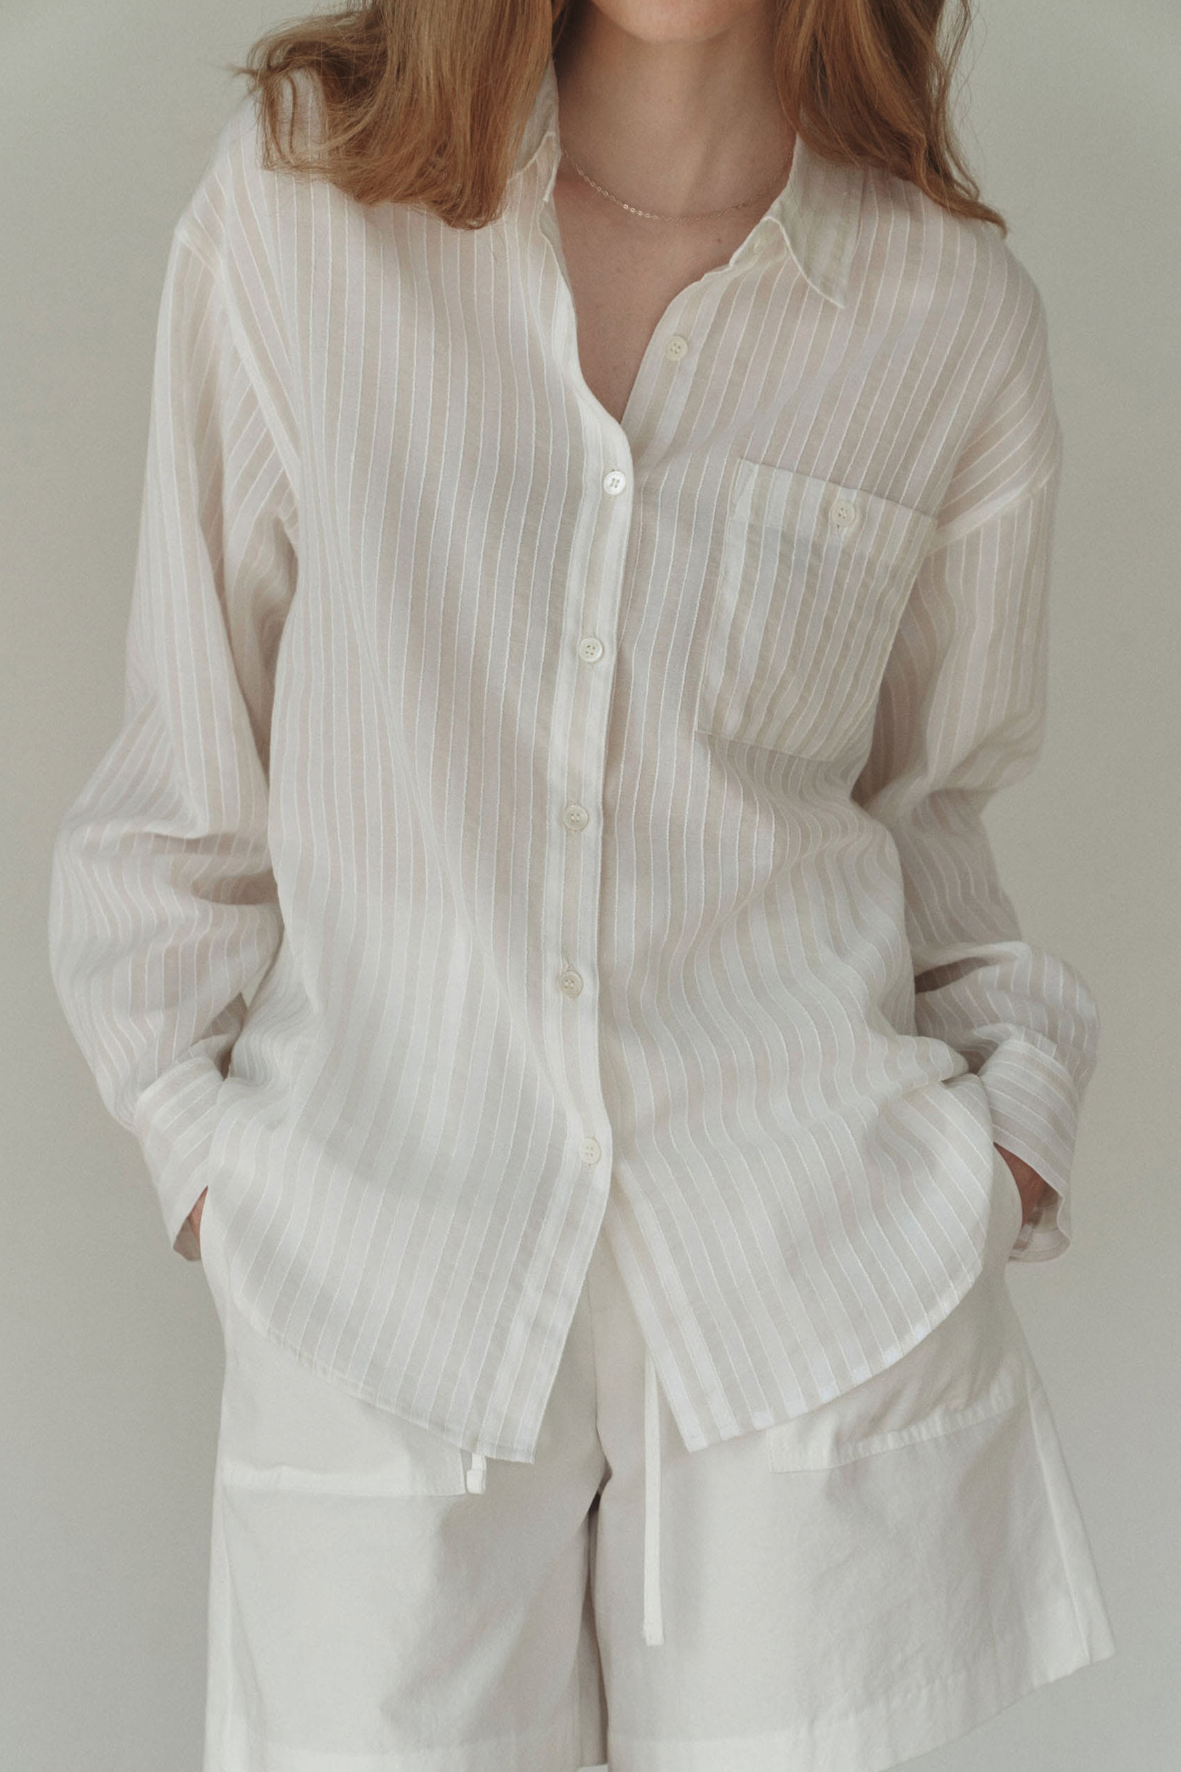 [SLOCO] Classic natural shirt, sheer stripe (Limited italy fabric)